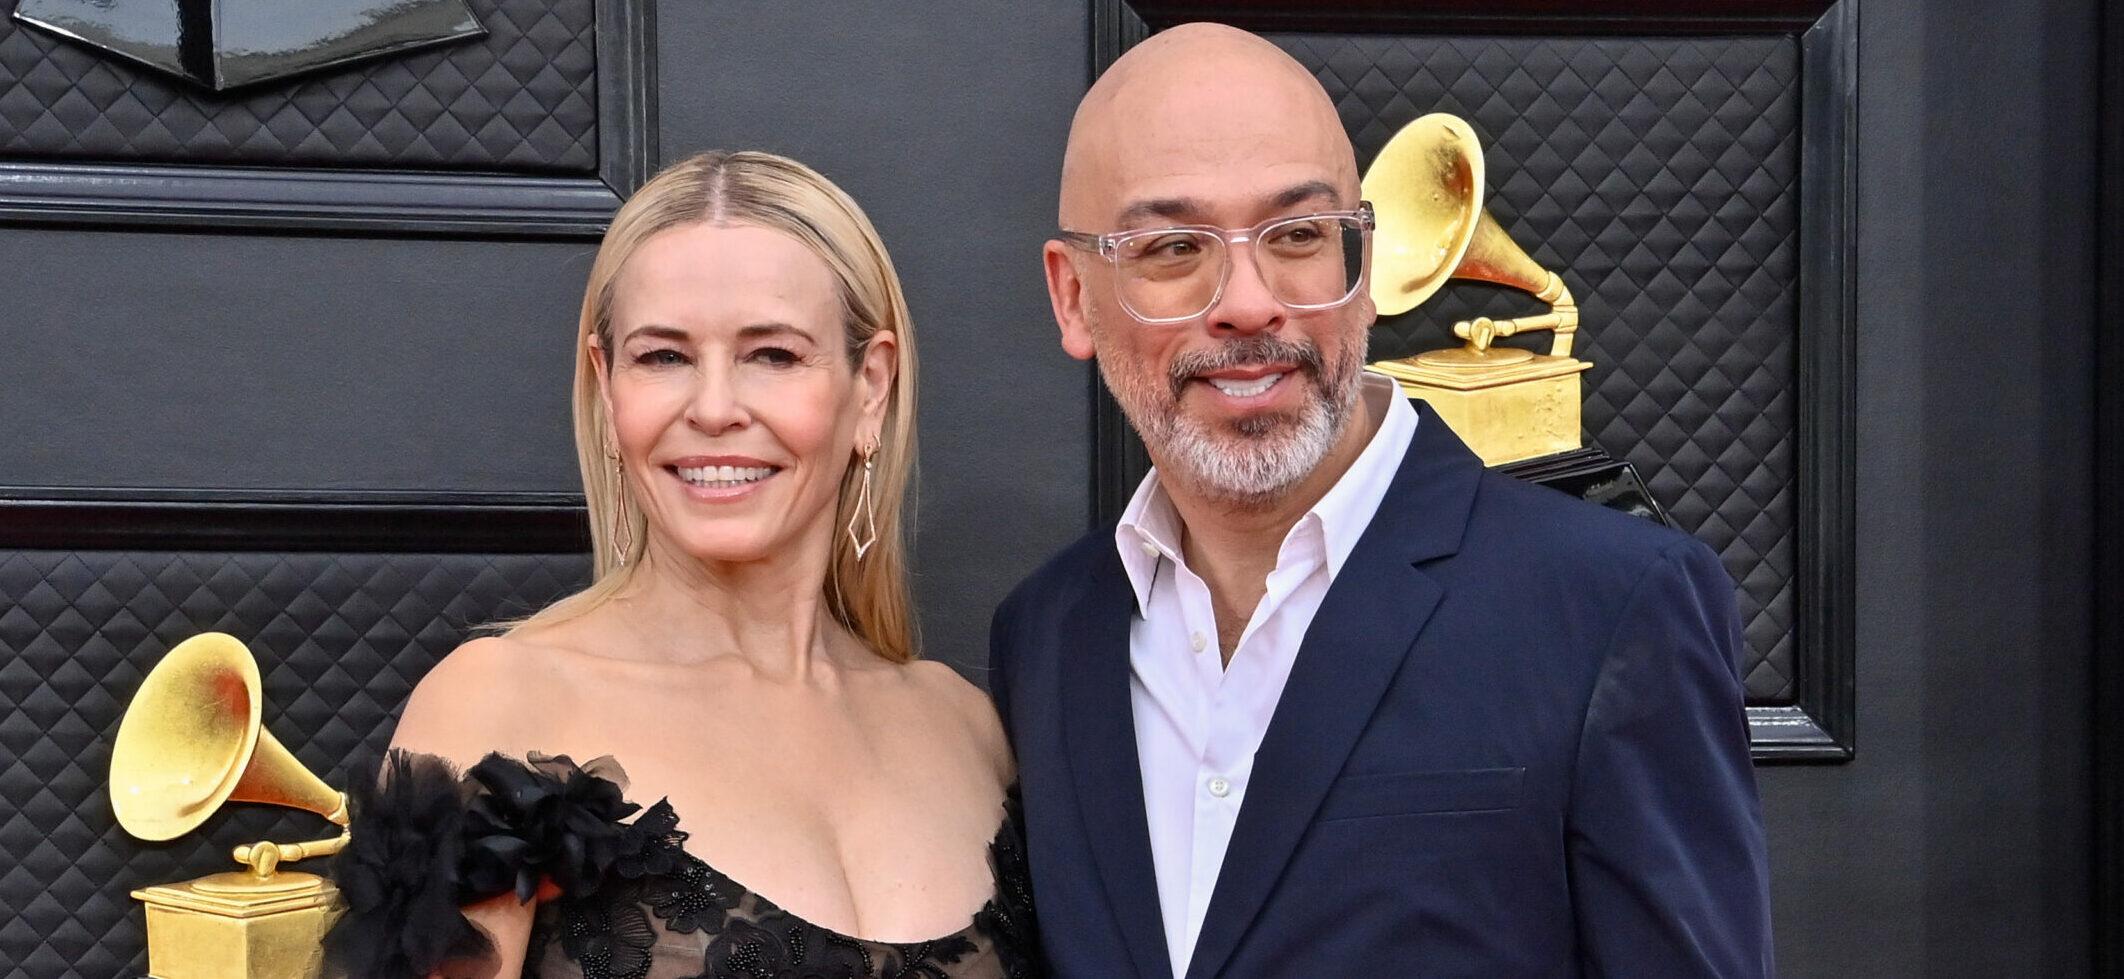 Chelsea Handler Has Almost All The Qualities She Wants In BF Jo Koy: ‘The Sweetest’